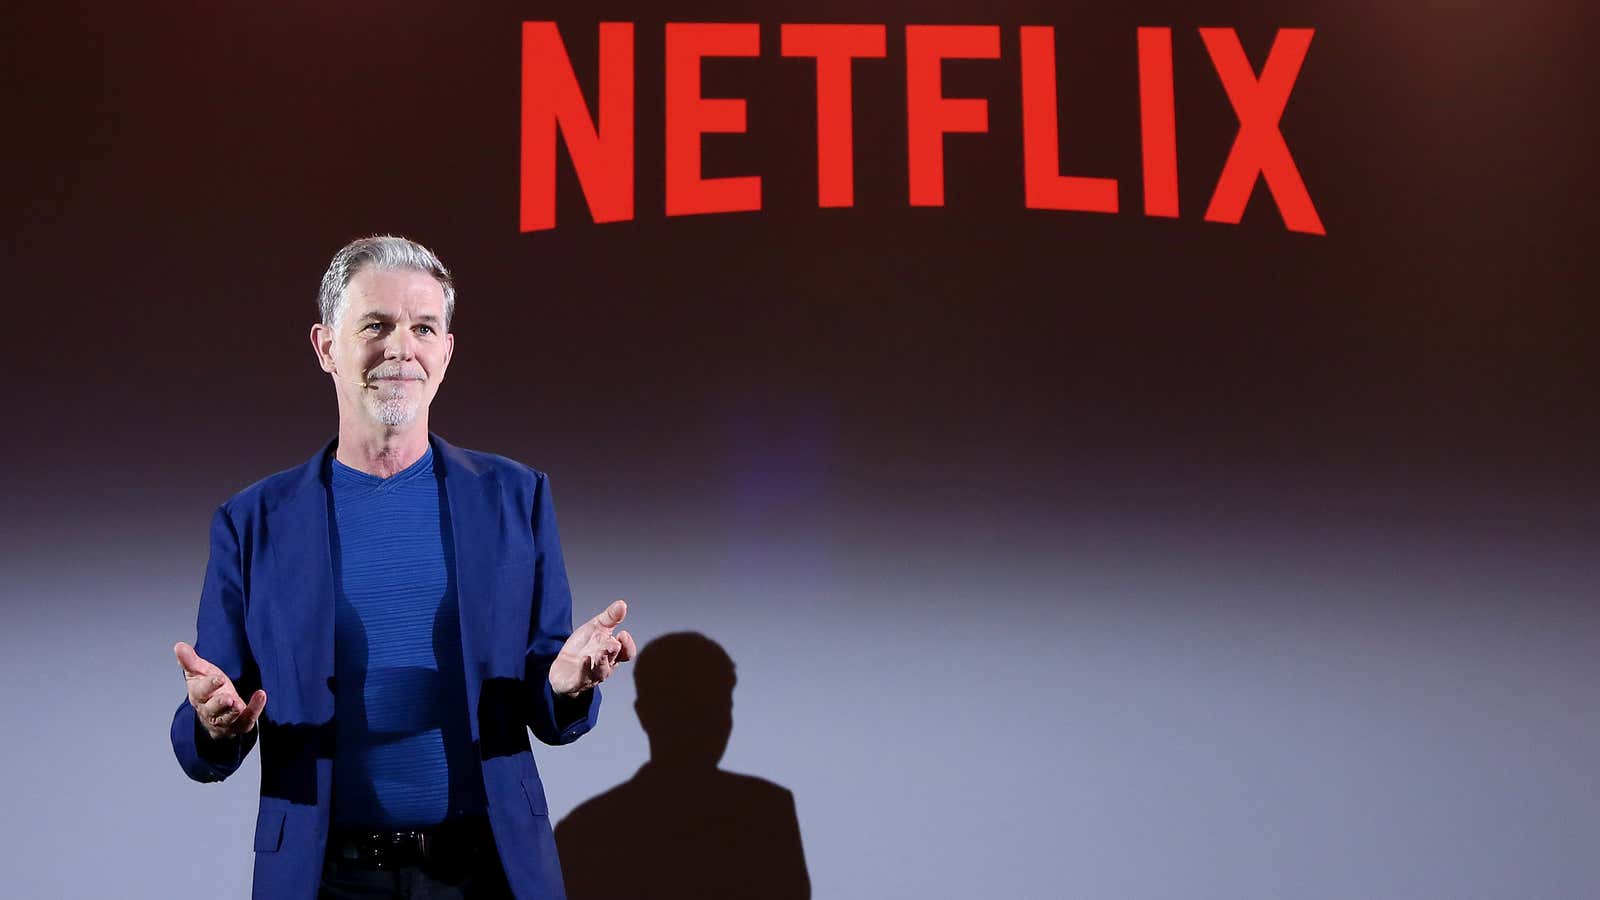 Netflix CEO Reed Hastings delivers a keynote address at CES 2016 at The Venetian Las Vegas on January 6, 2016 in Las Vegas, Nevada.